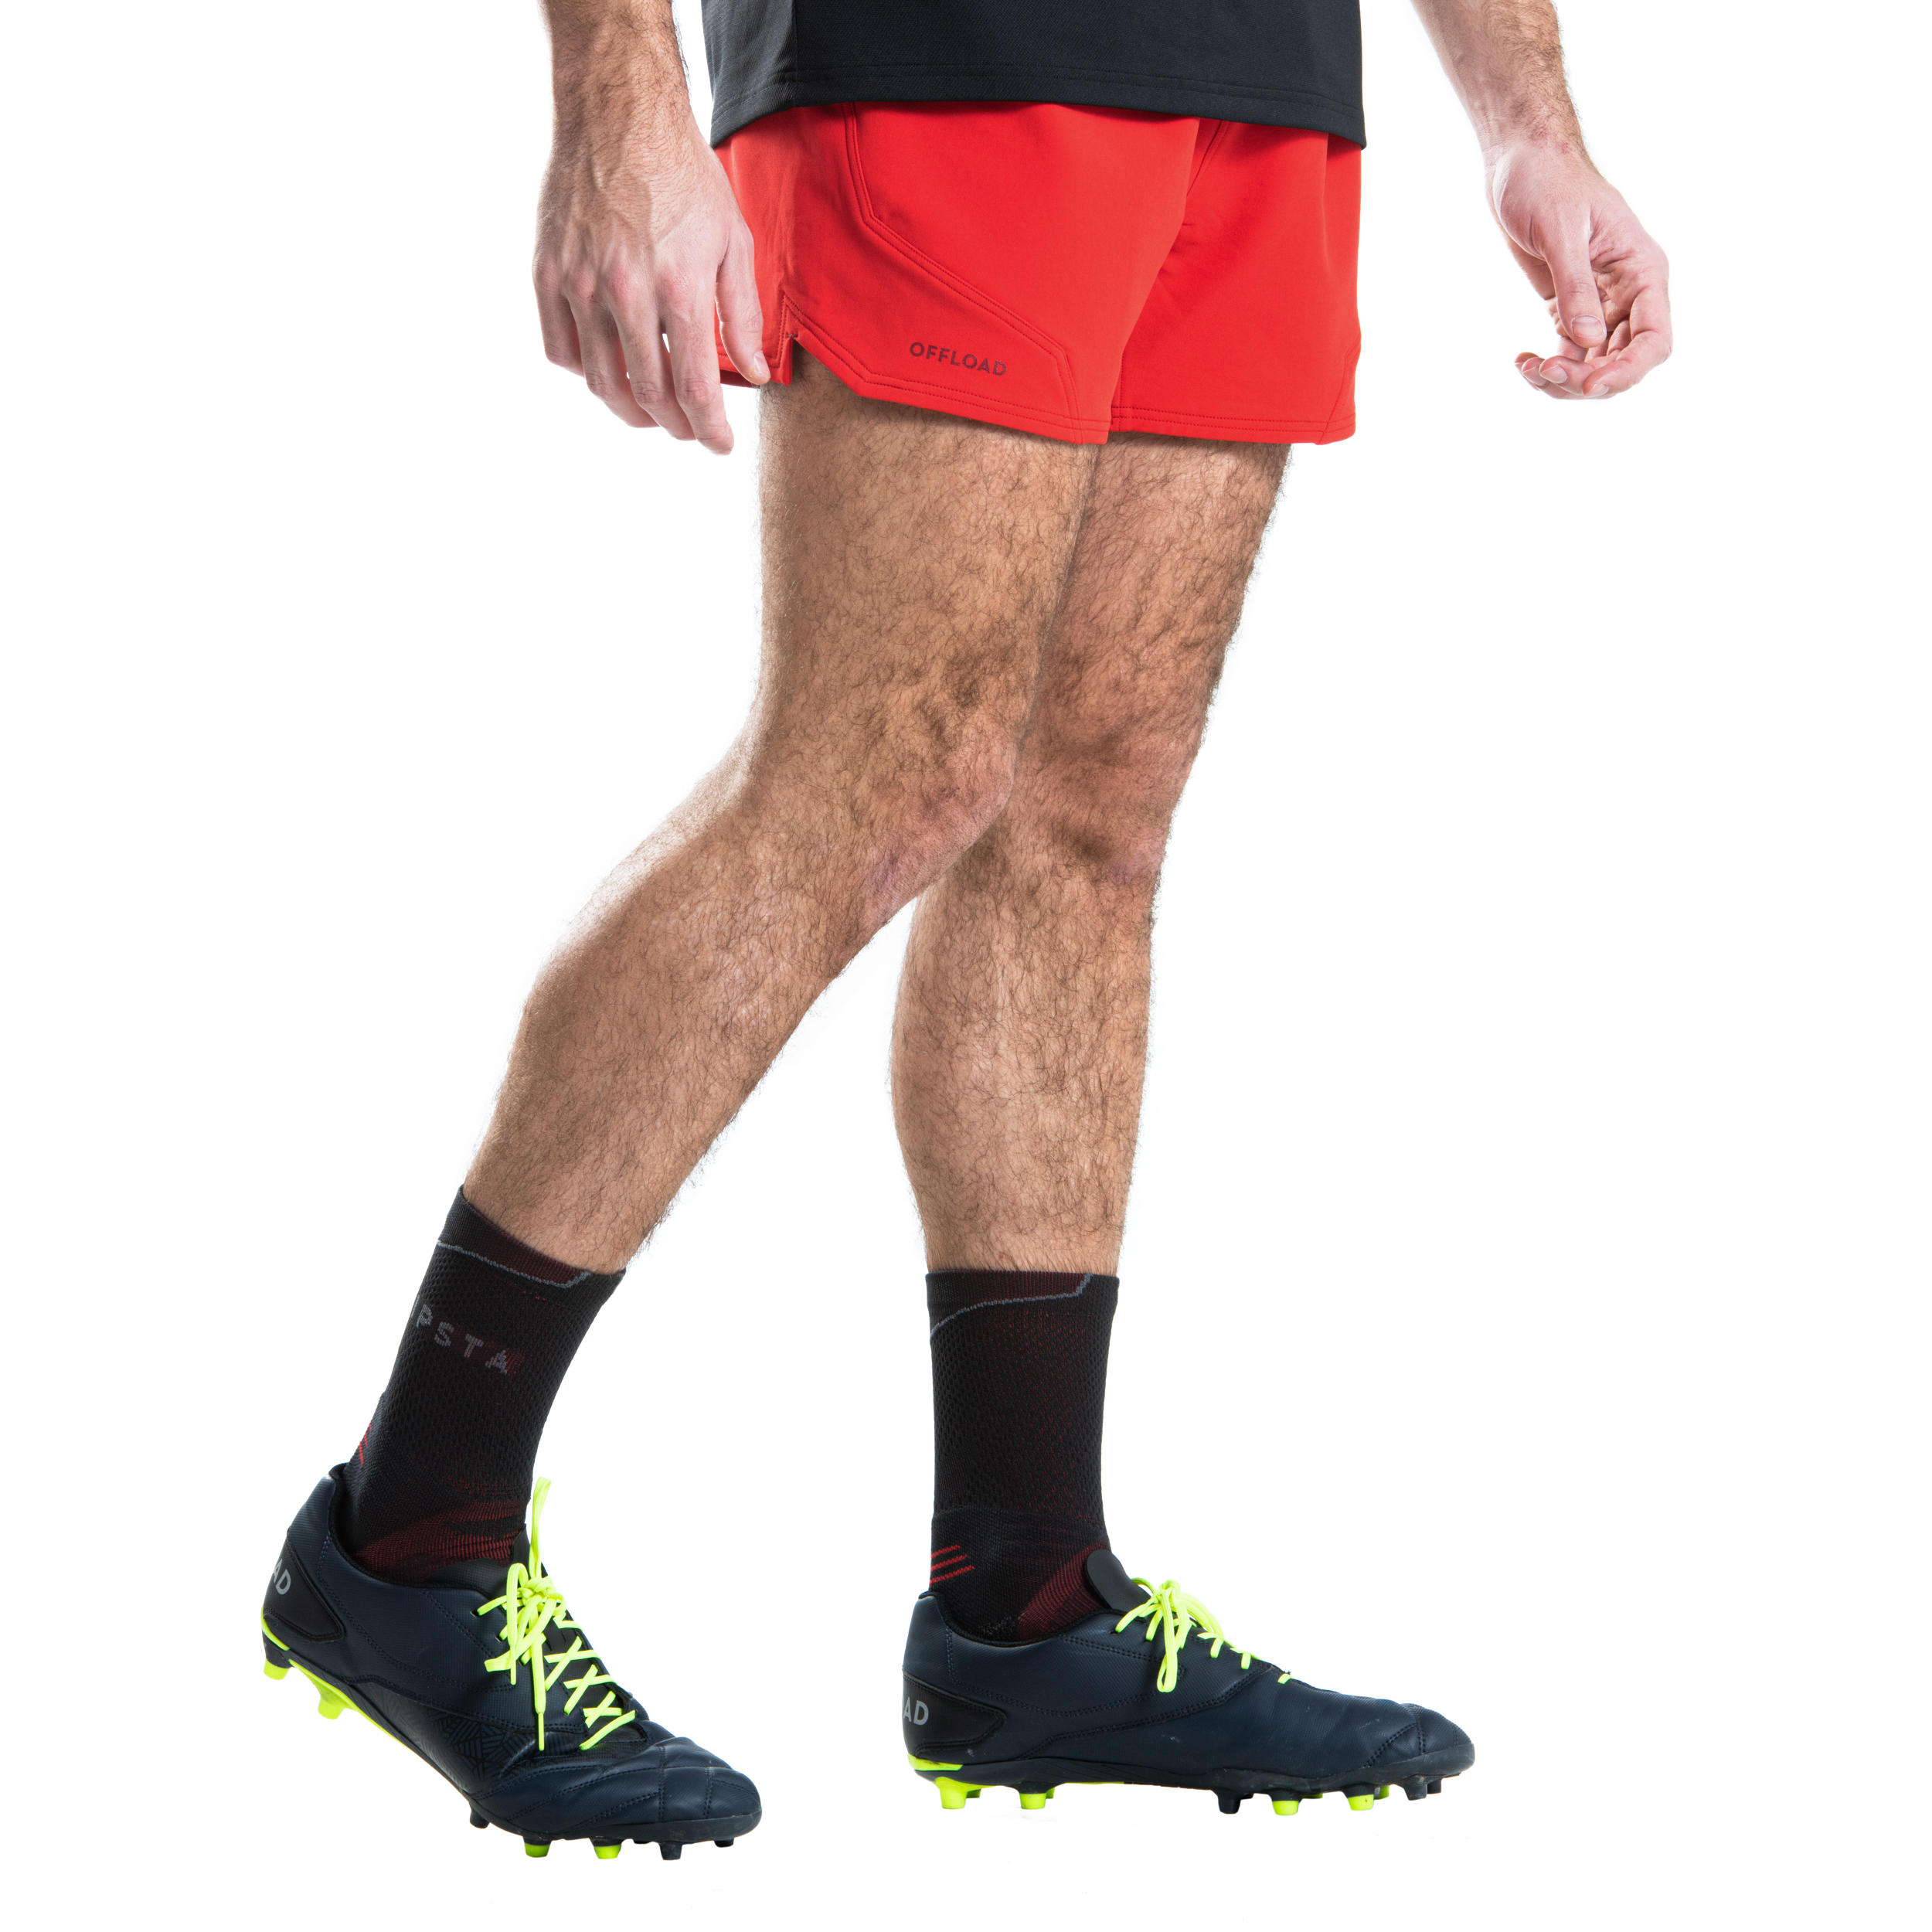 Men’s Rugby Shorts R500 - Red 8/9